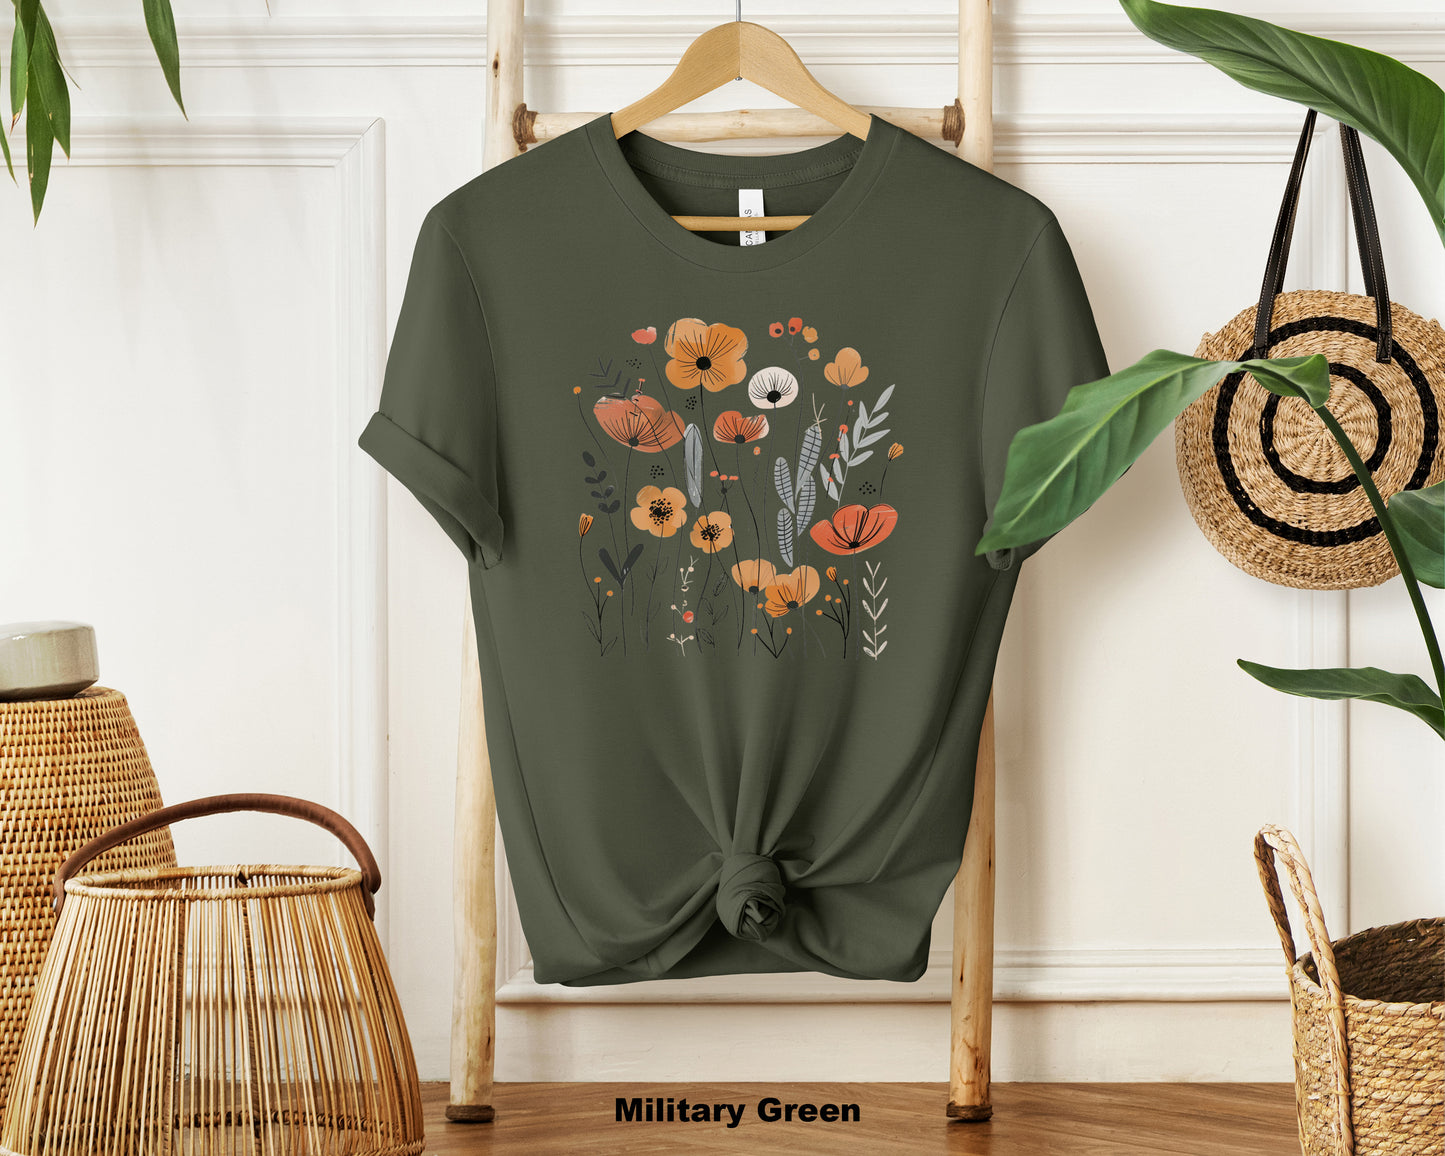 Tranquil Blossoms Neutral Floral Shirt - Gift for Flower Lovers